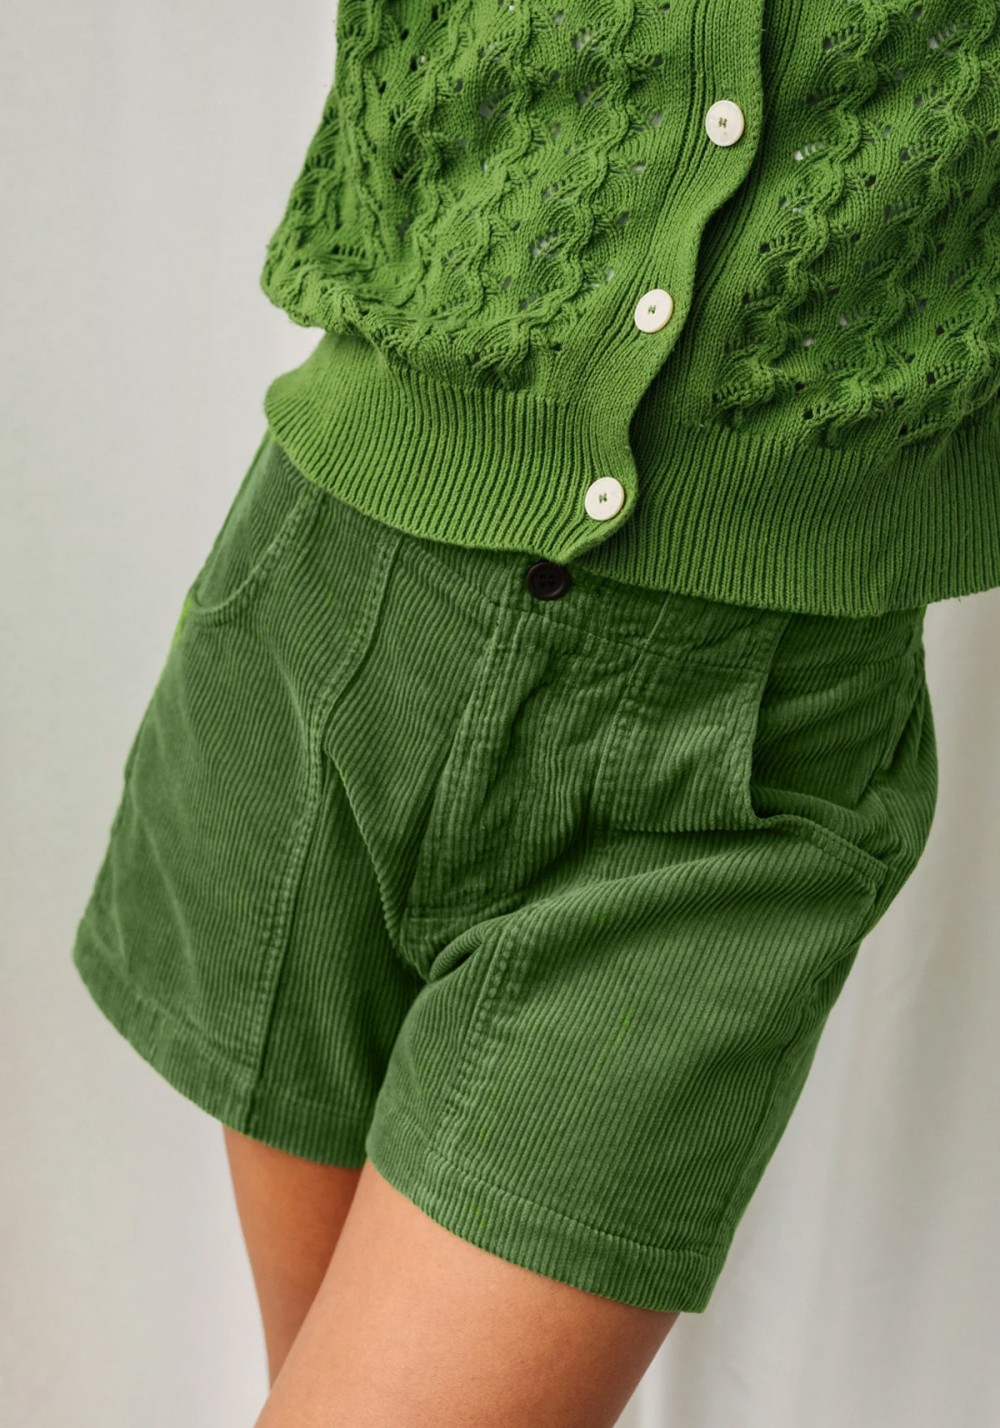 Twothirds - Kord-Shorts Cockatoo Grass Green